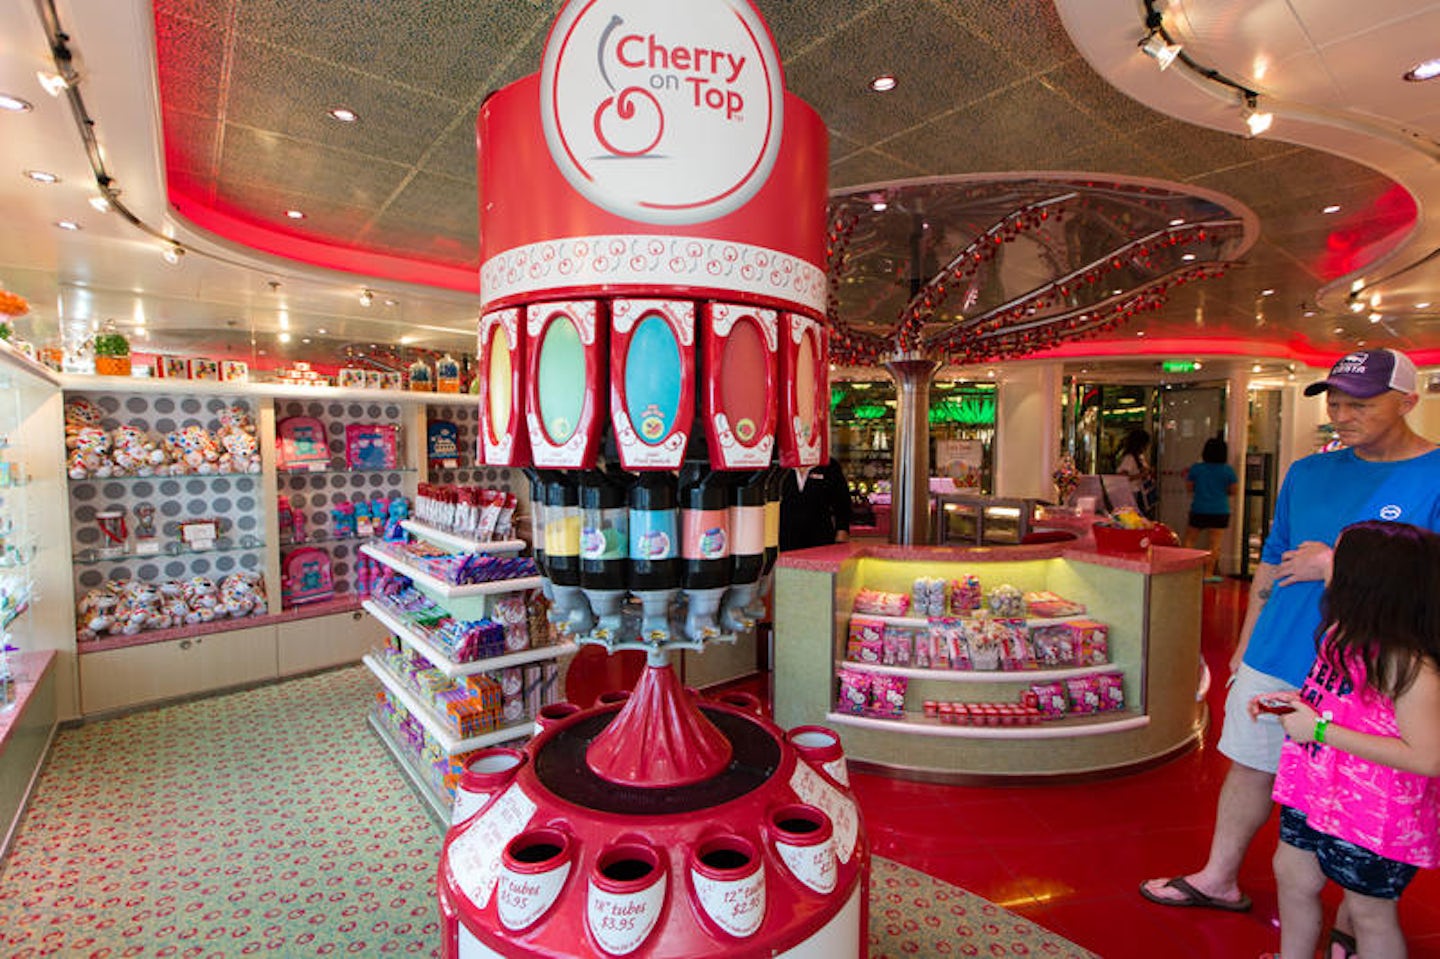 Cherry on Top on Carnival Magic